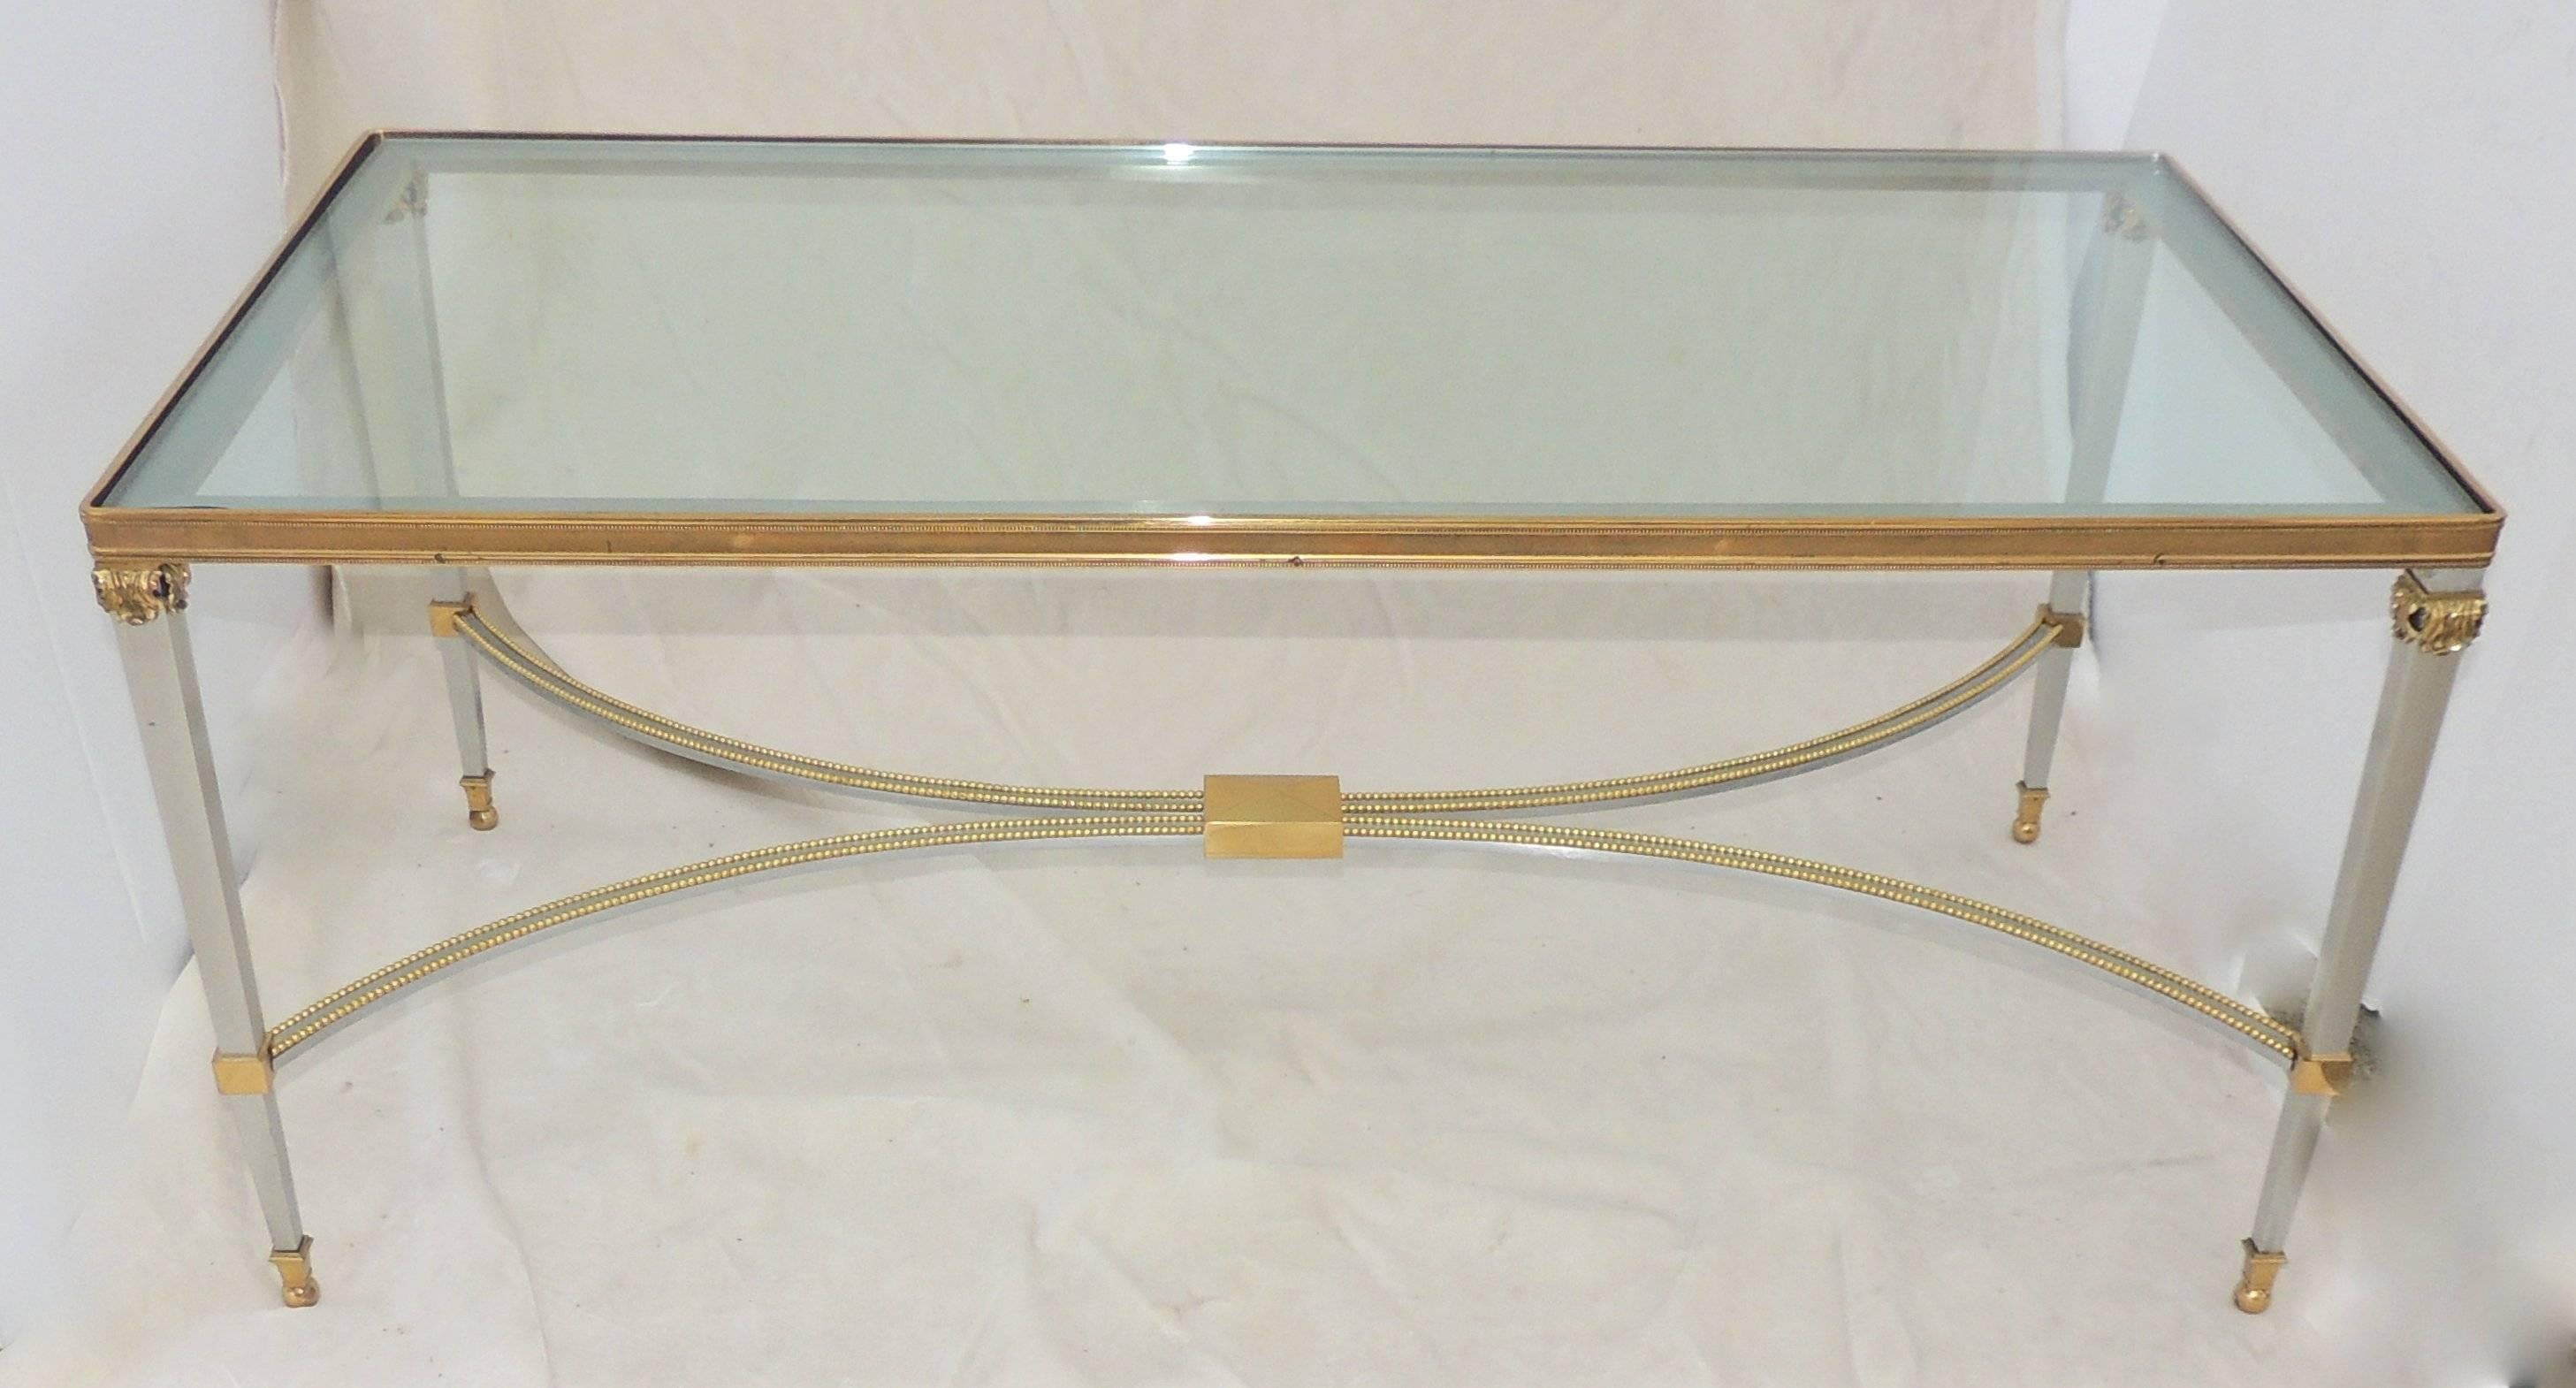 A wonderful cocktail table with silvered bronze bagues style, coffee table with inset glass top in The Jansen Style & Fine Accents.
Measures: 21" W x 41" L x 17" H.